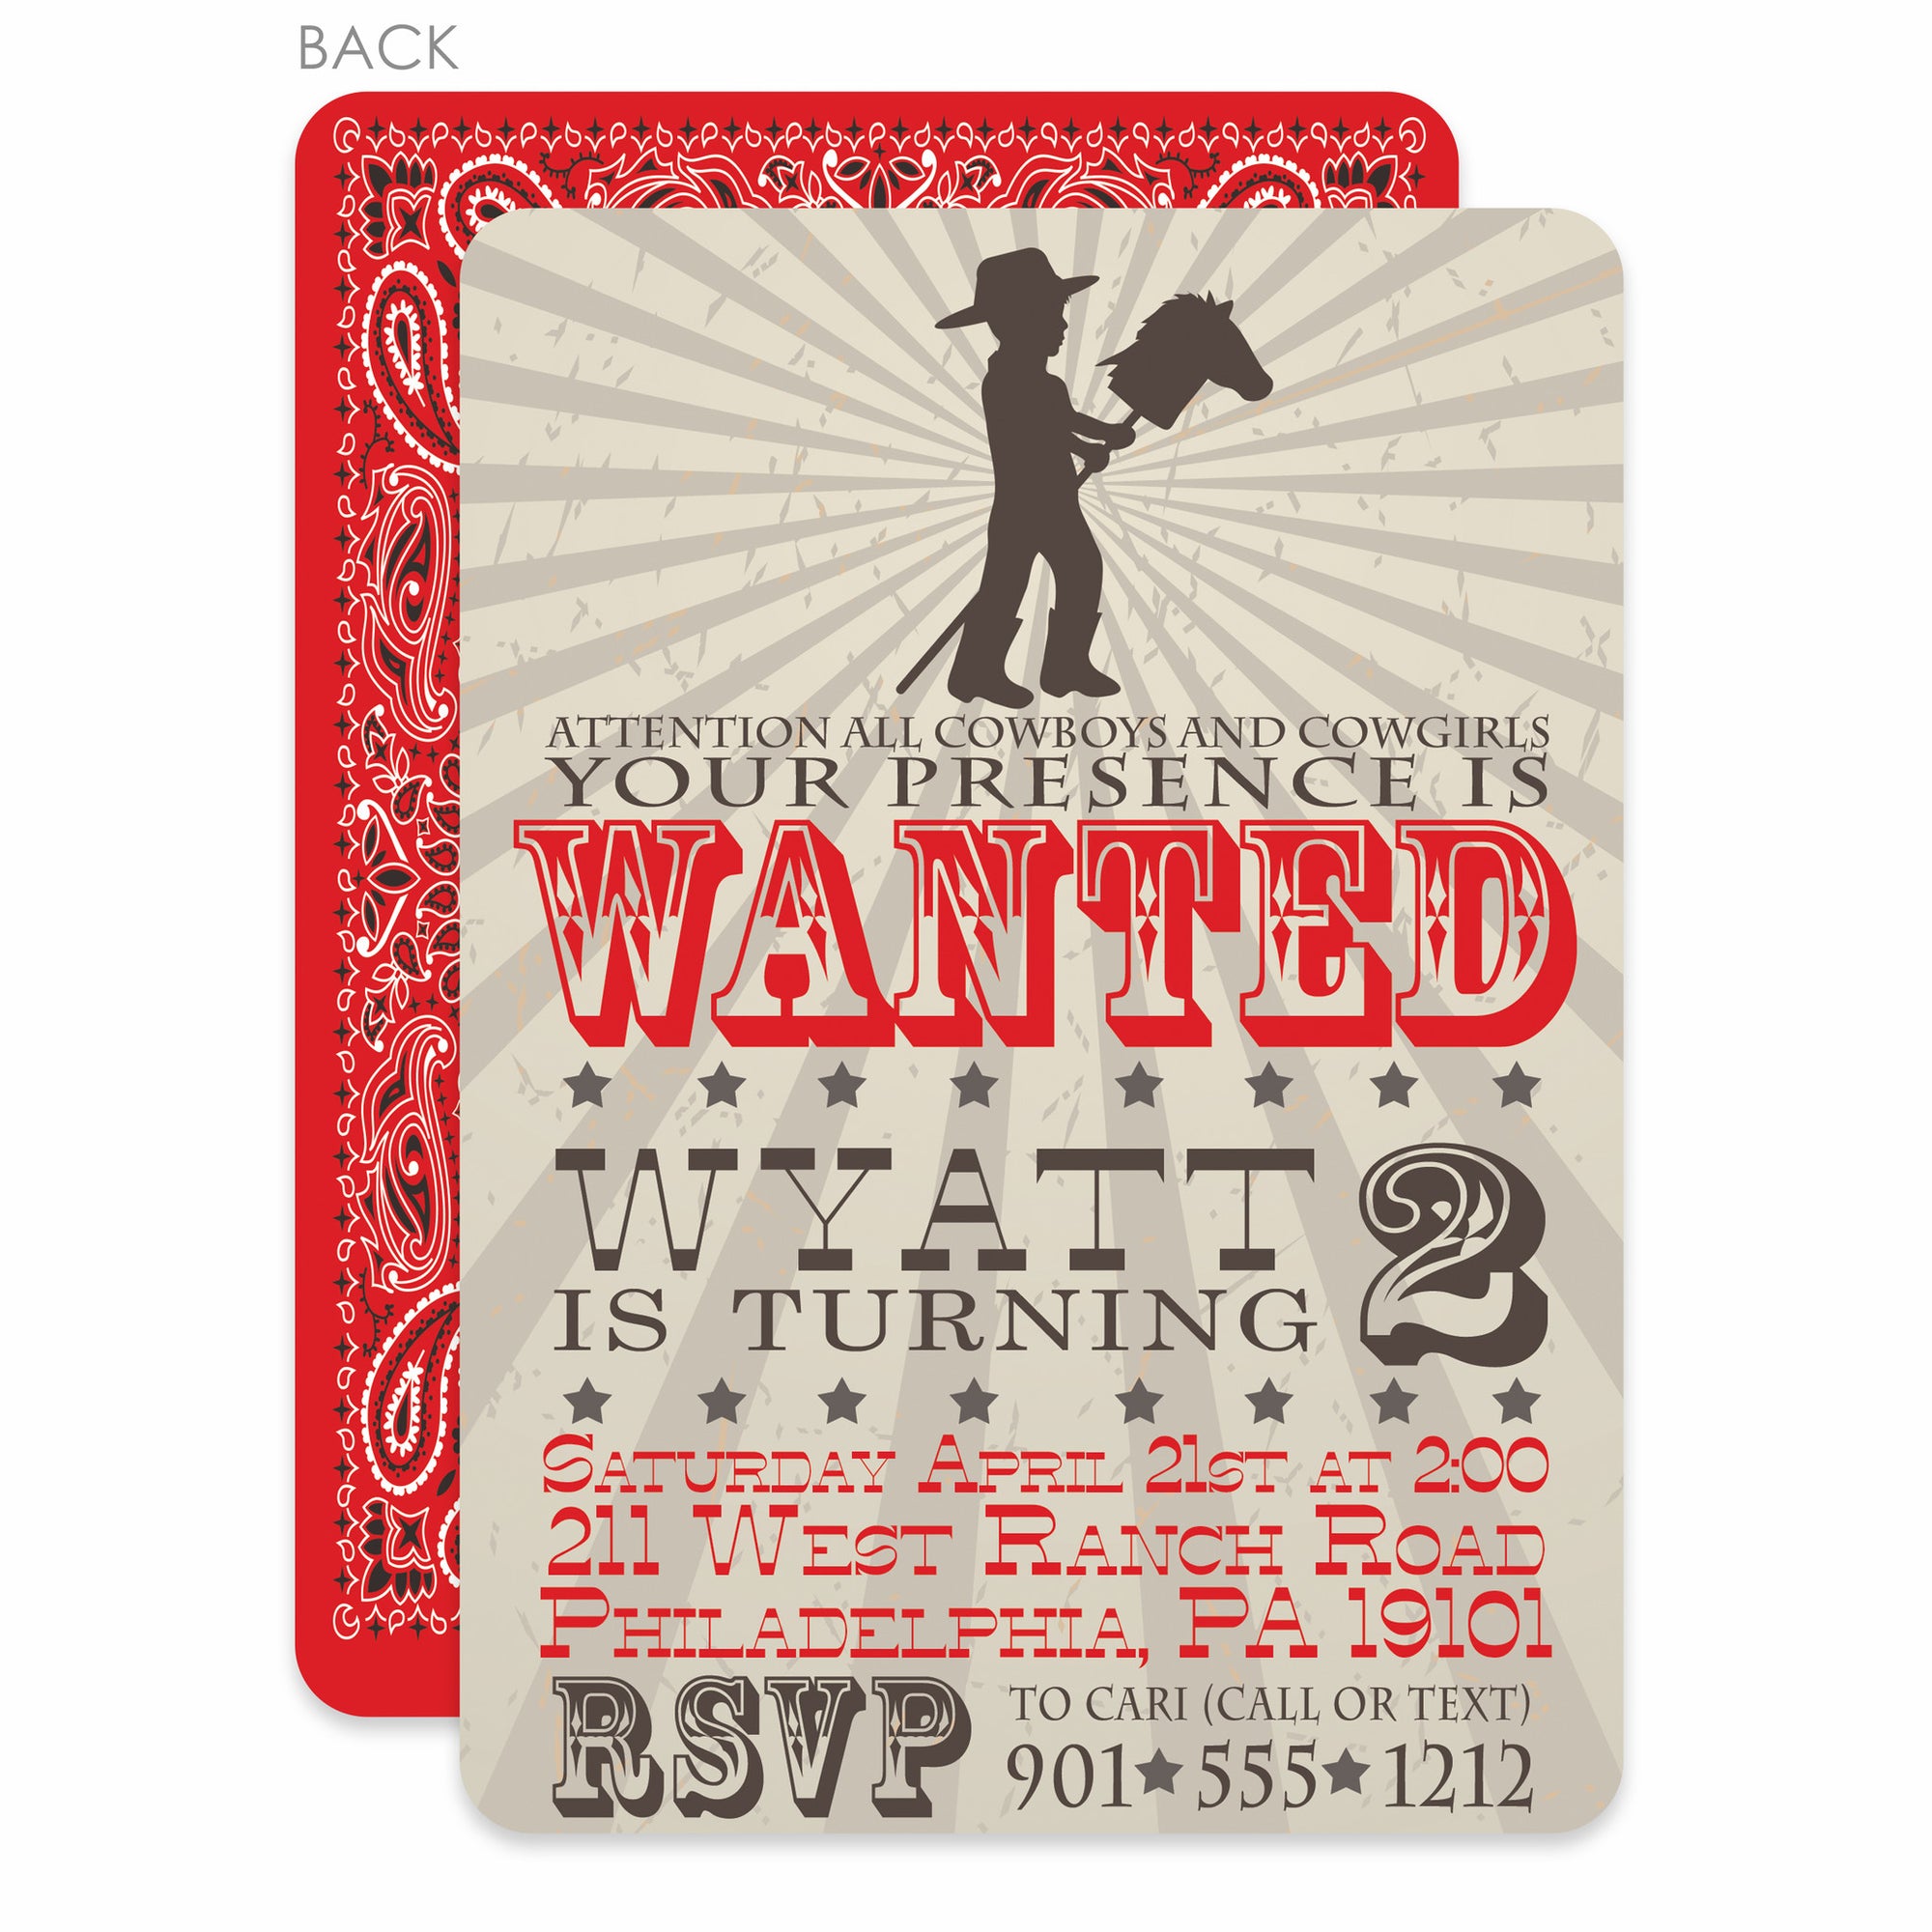 Stick Horse Cowboy Invitation | Pipsy.com | Red, printed on heavy cardstock with fun western styling